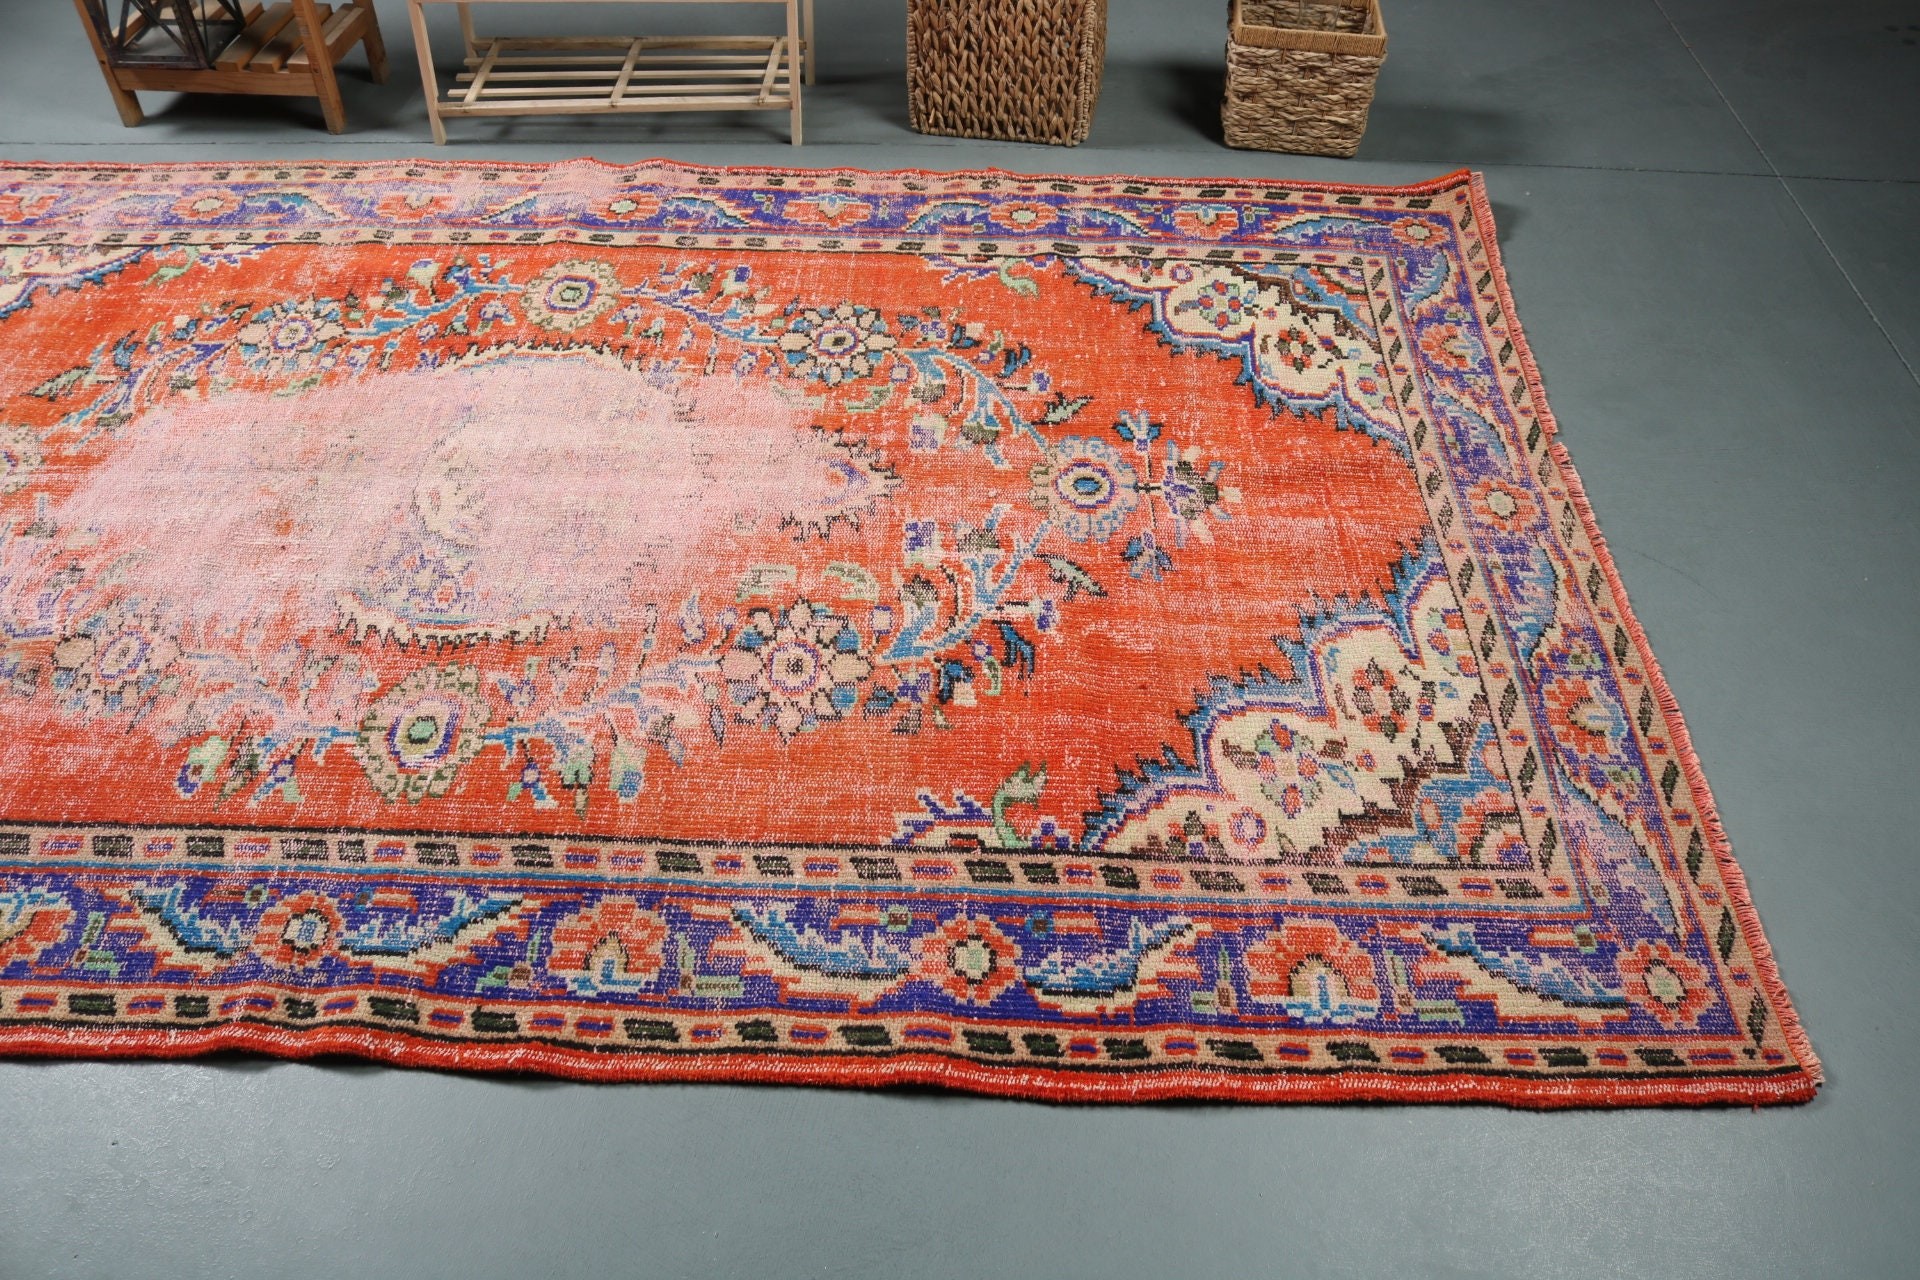 Wool Rug, Vintage Rug, 5.5x5.9 ft Area Rugs, Decorative Rug, Living Room Rug, Turkish Rugs, Rugs for Dining Room, Kitchen Rugs, Antique Rug